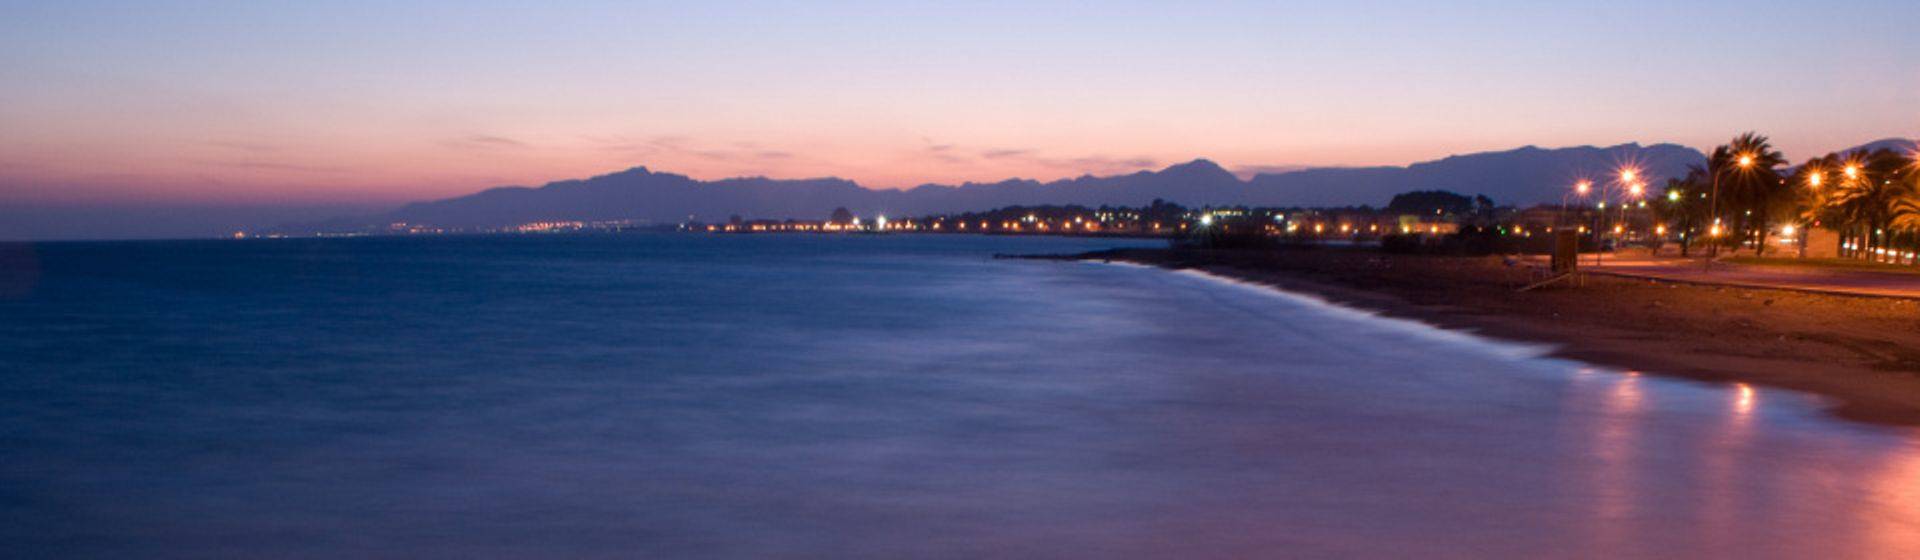 Holidays to Cambrils Image